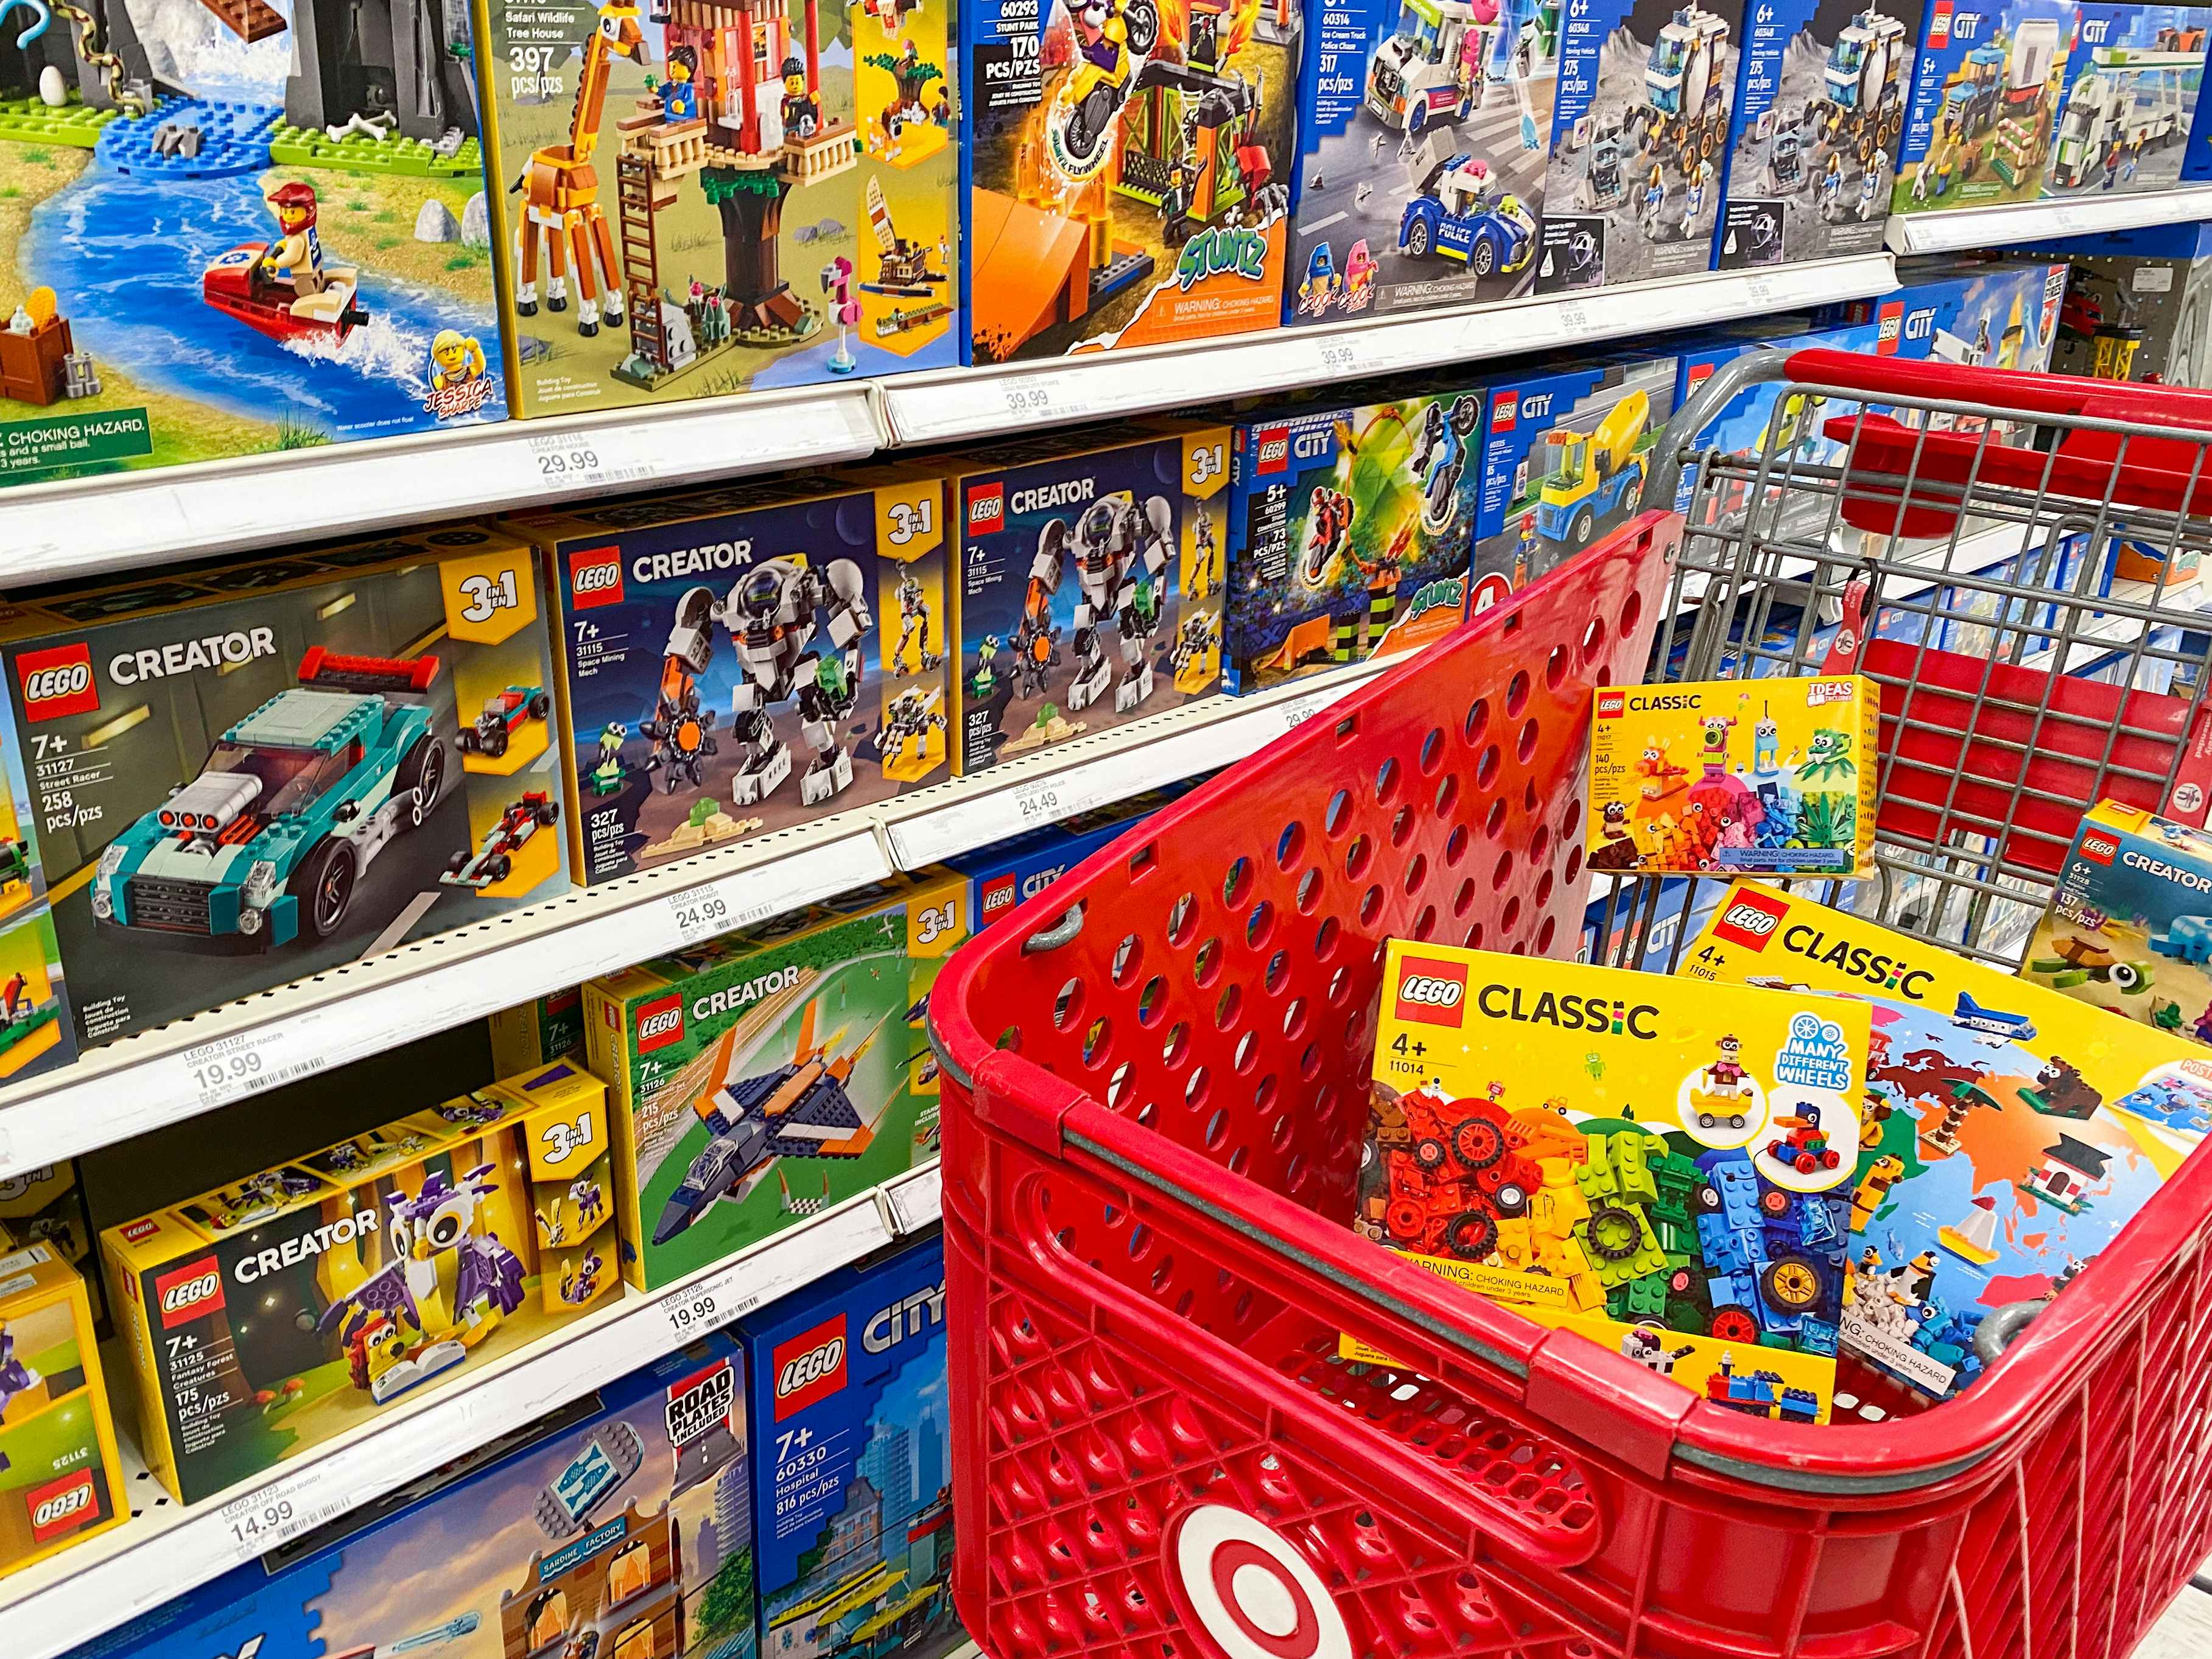 A Target shopping cart full of LEGO toys parked next to a shelf stocked with LEGO toys at Target.